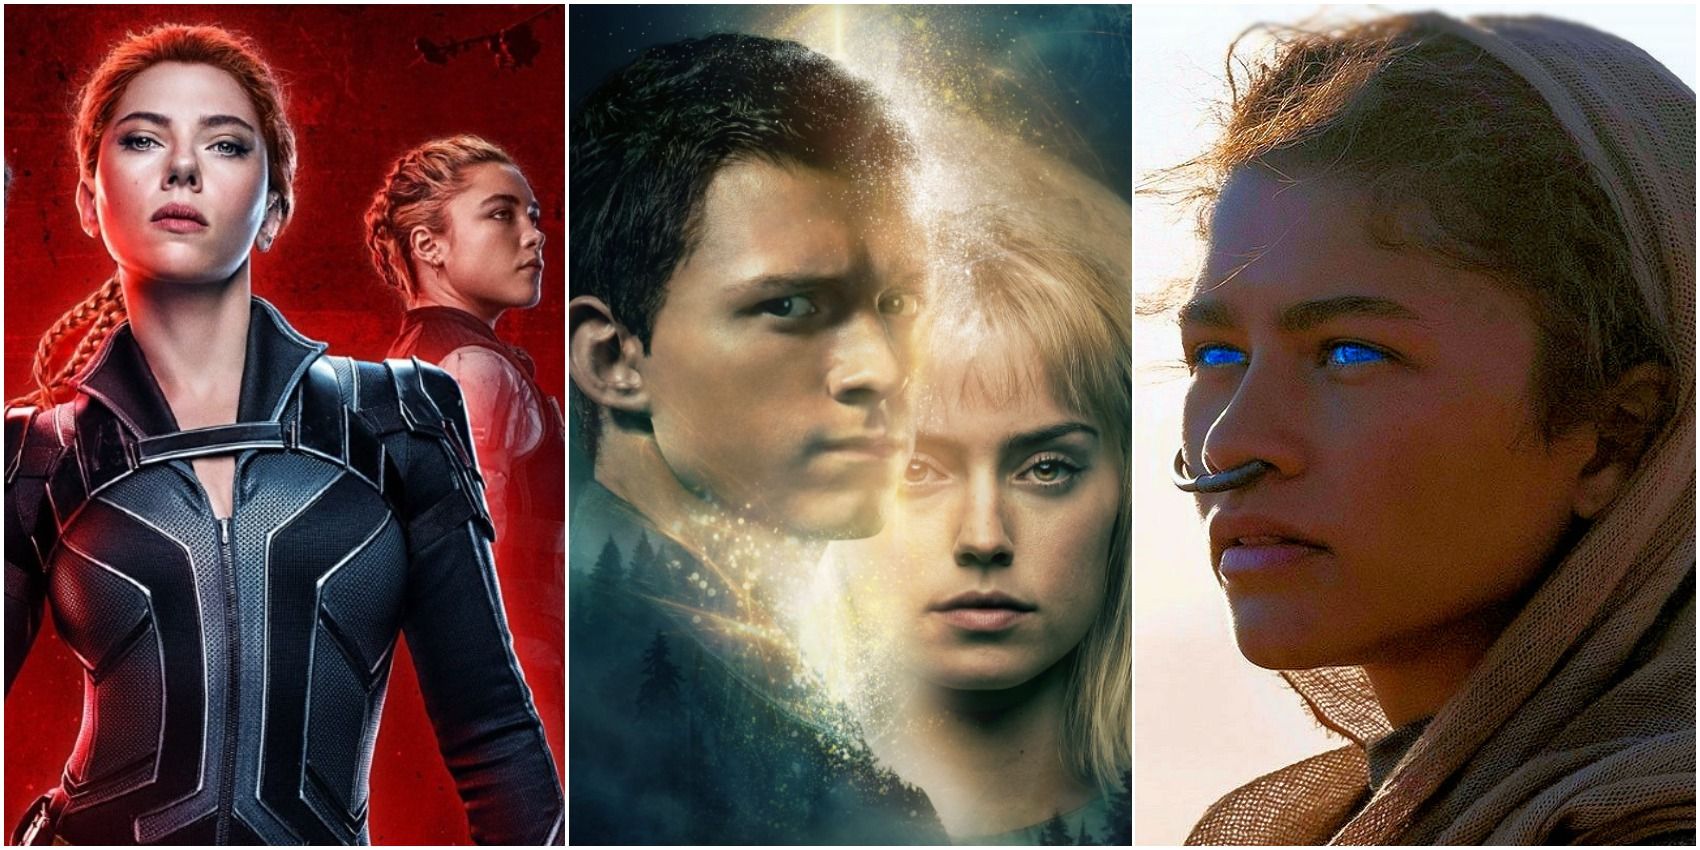 The 10 MostAnticipated SciFi Movies Of 2021 (According To Their IMDb Popularity)